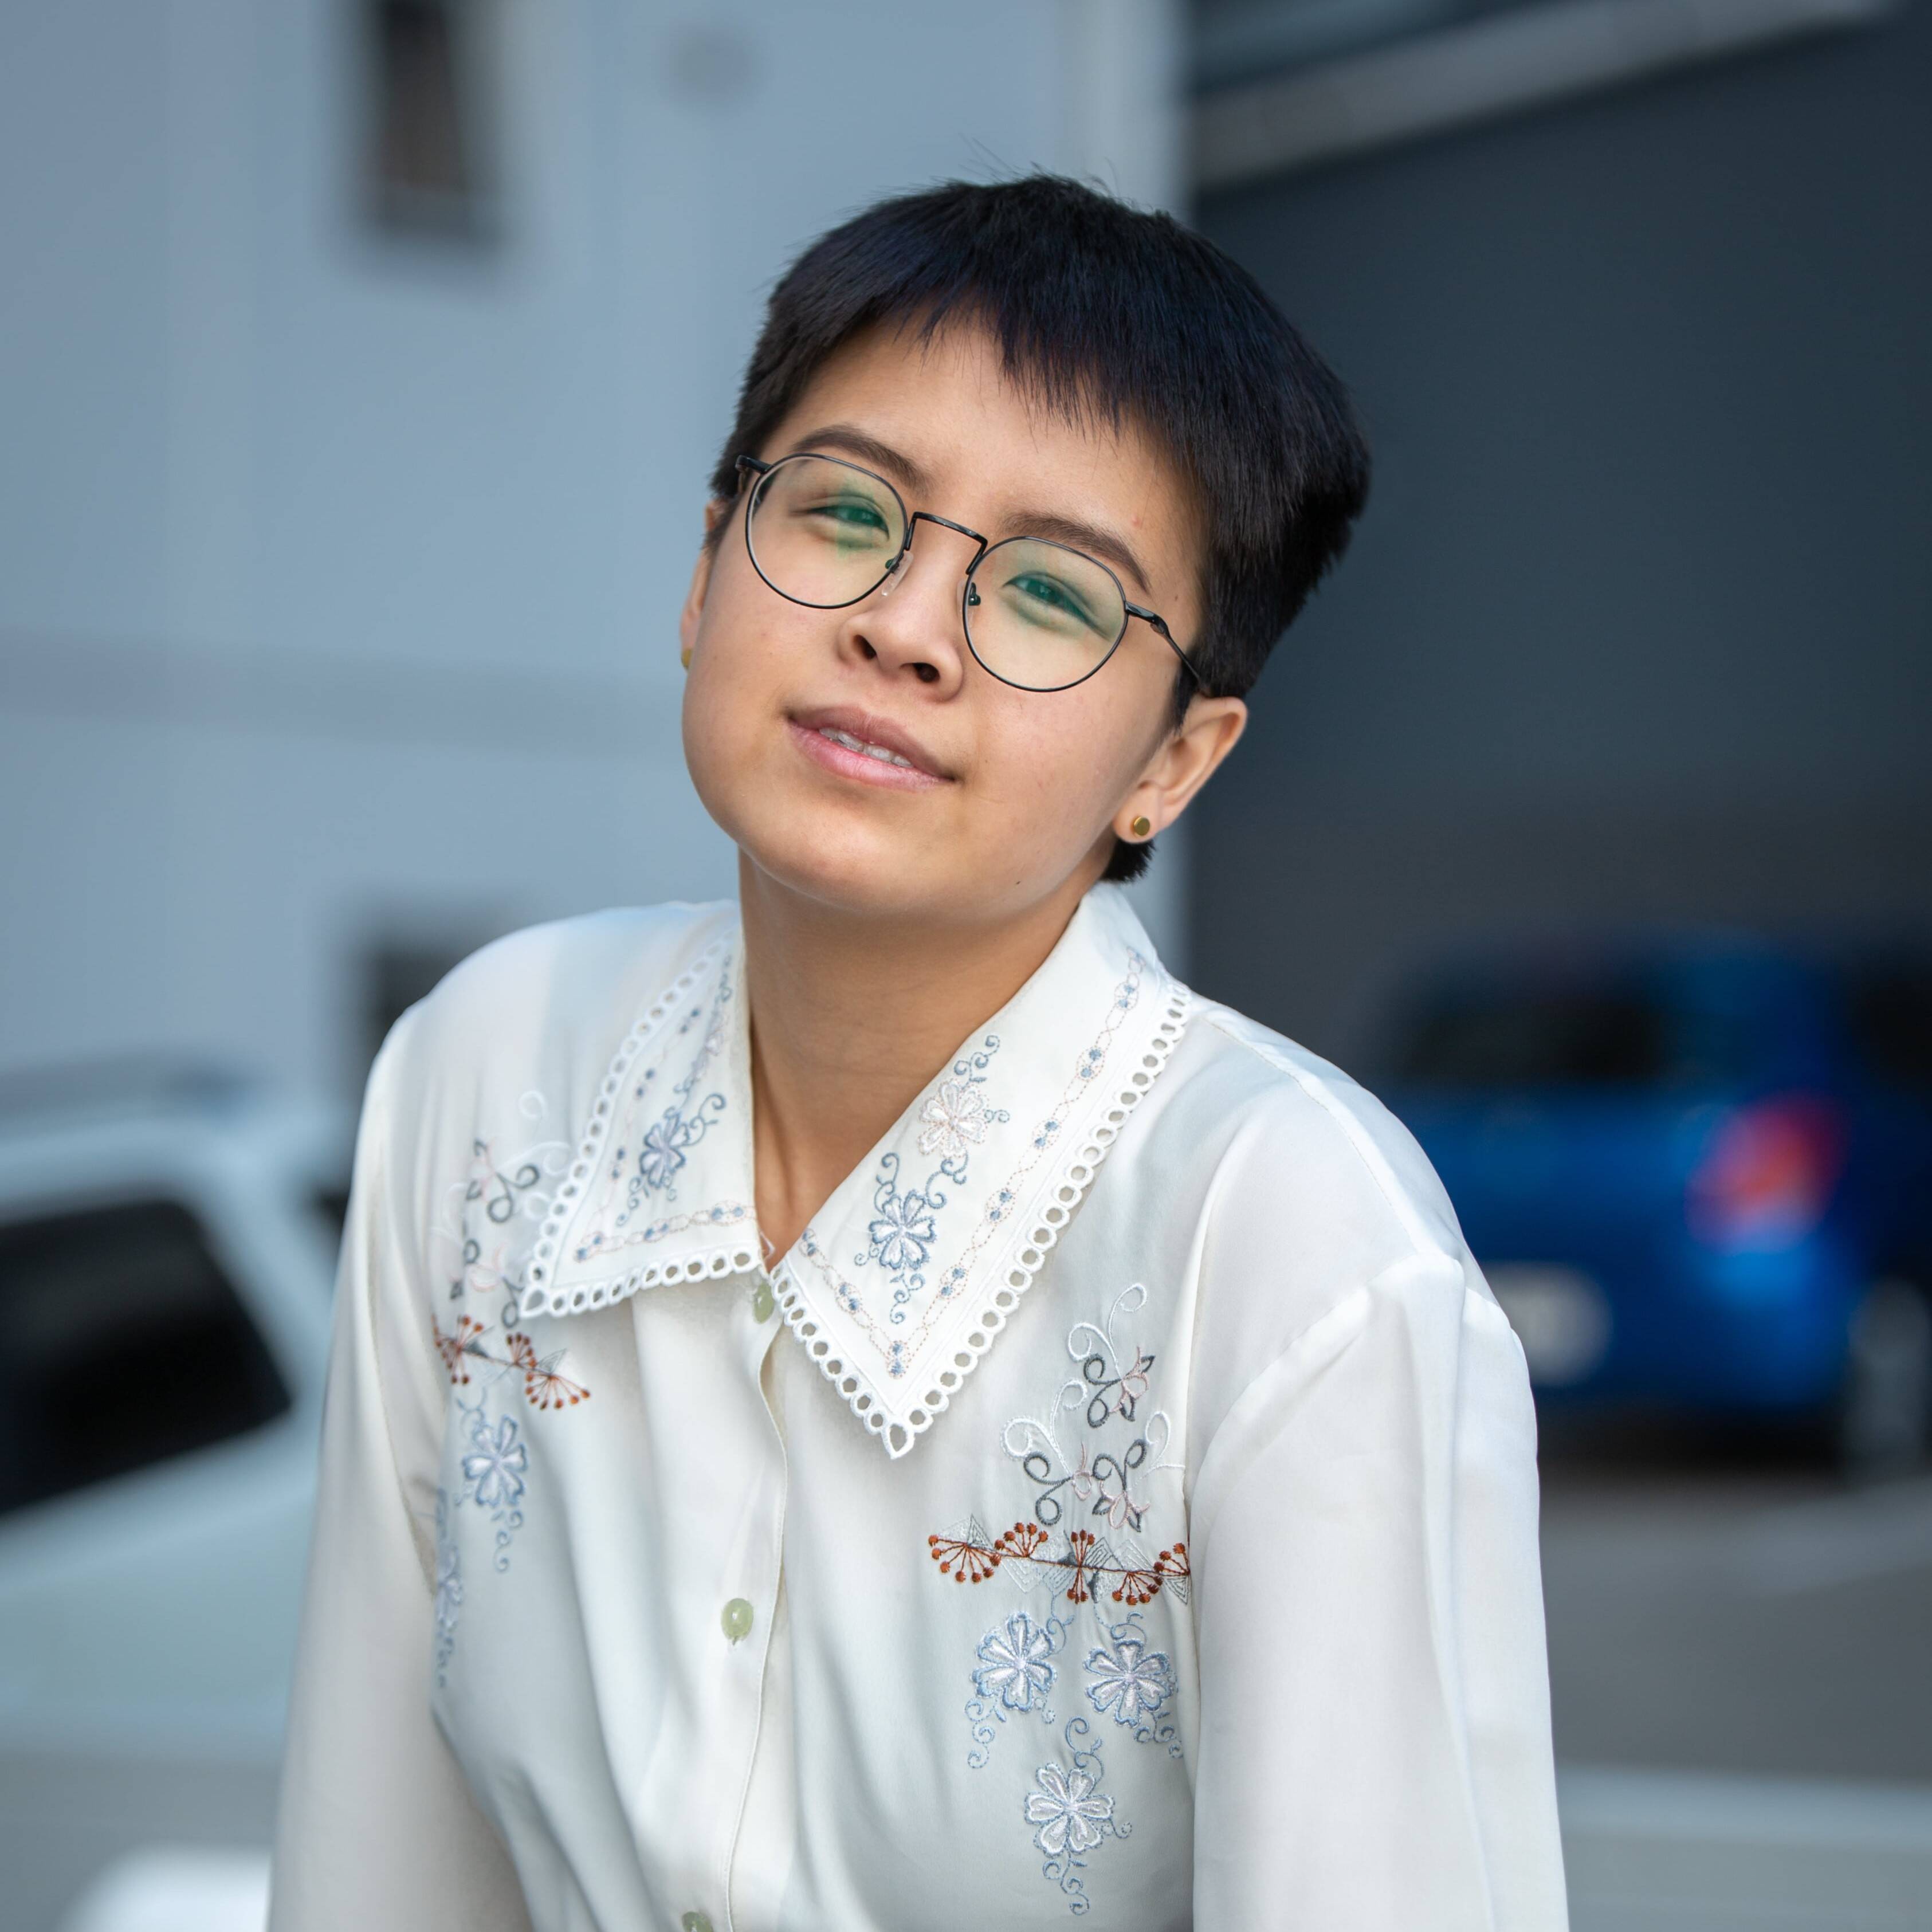 <p><strong>Zephyr Zhang</strong></p>

<p><a href="https://zephyrzhang.com/">Zephyr Zhang</a> (they/them) is a writer and performer based in Tāmaki Makaurau, whose work explores migrant and Queer experiences. Zephyr is both neurodivergent and sleepy. They have performed in the Auckland Theatre Company&rsquo;s iteration of Scenes from a Yellow Peril, I Am Rachel Chu and OTHER [chinese]. Zephyr&#39;s writing has featured in Starling, Sweet Mammalian, Mayhem, Rapture: An Anthology of Performance Poetry from Aotearoa New Zealand (Auckland University Press, 2023), and a range of independent zines.&nbsp;</p>

<p>Zephyr Zhang (称谓：他/她) 是一位居住在奥克兰的作家和表演者。他的作品探讨了身为移民和酷儿的个人体验。Zephyr既具神经多样性，又沉沉欲睡。他/她曾在 Auckland Theatre Company 参与《Scenes from a Yellow Peril》、《I Am Rachel Chu》以及《OTHER [chinese]》的演出。Zephyr 的诗作曾被编入《Starling》、《Sweet Mammalian》、《Mayhem》、《Rapture: An Anthology of Performance Poetry from Aotearoa New Zealand》(Auckland University Press, 2023年出版)，以及一系列独立杂志。</p>
